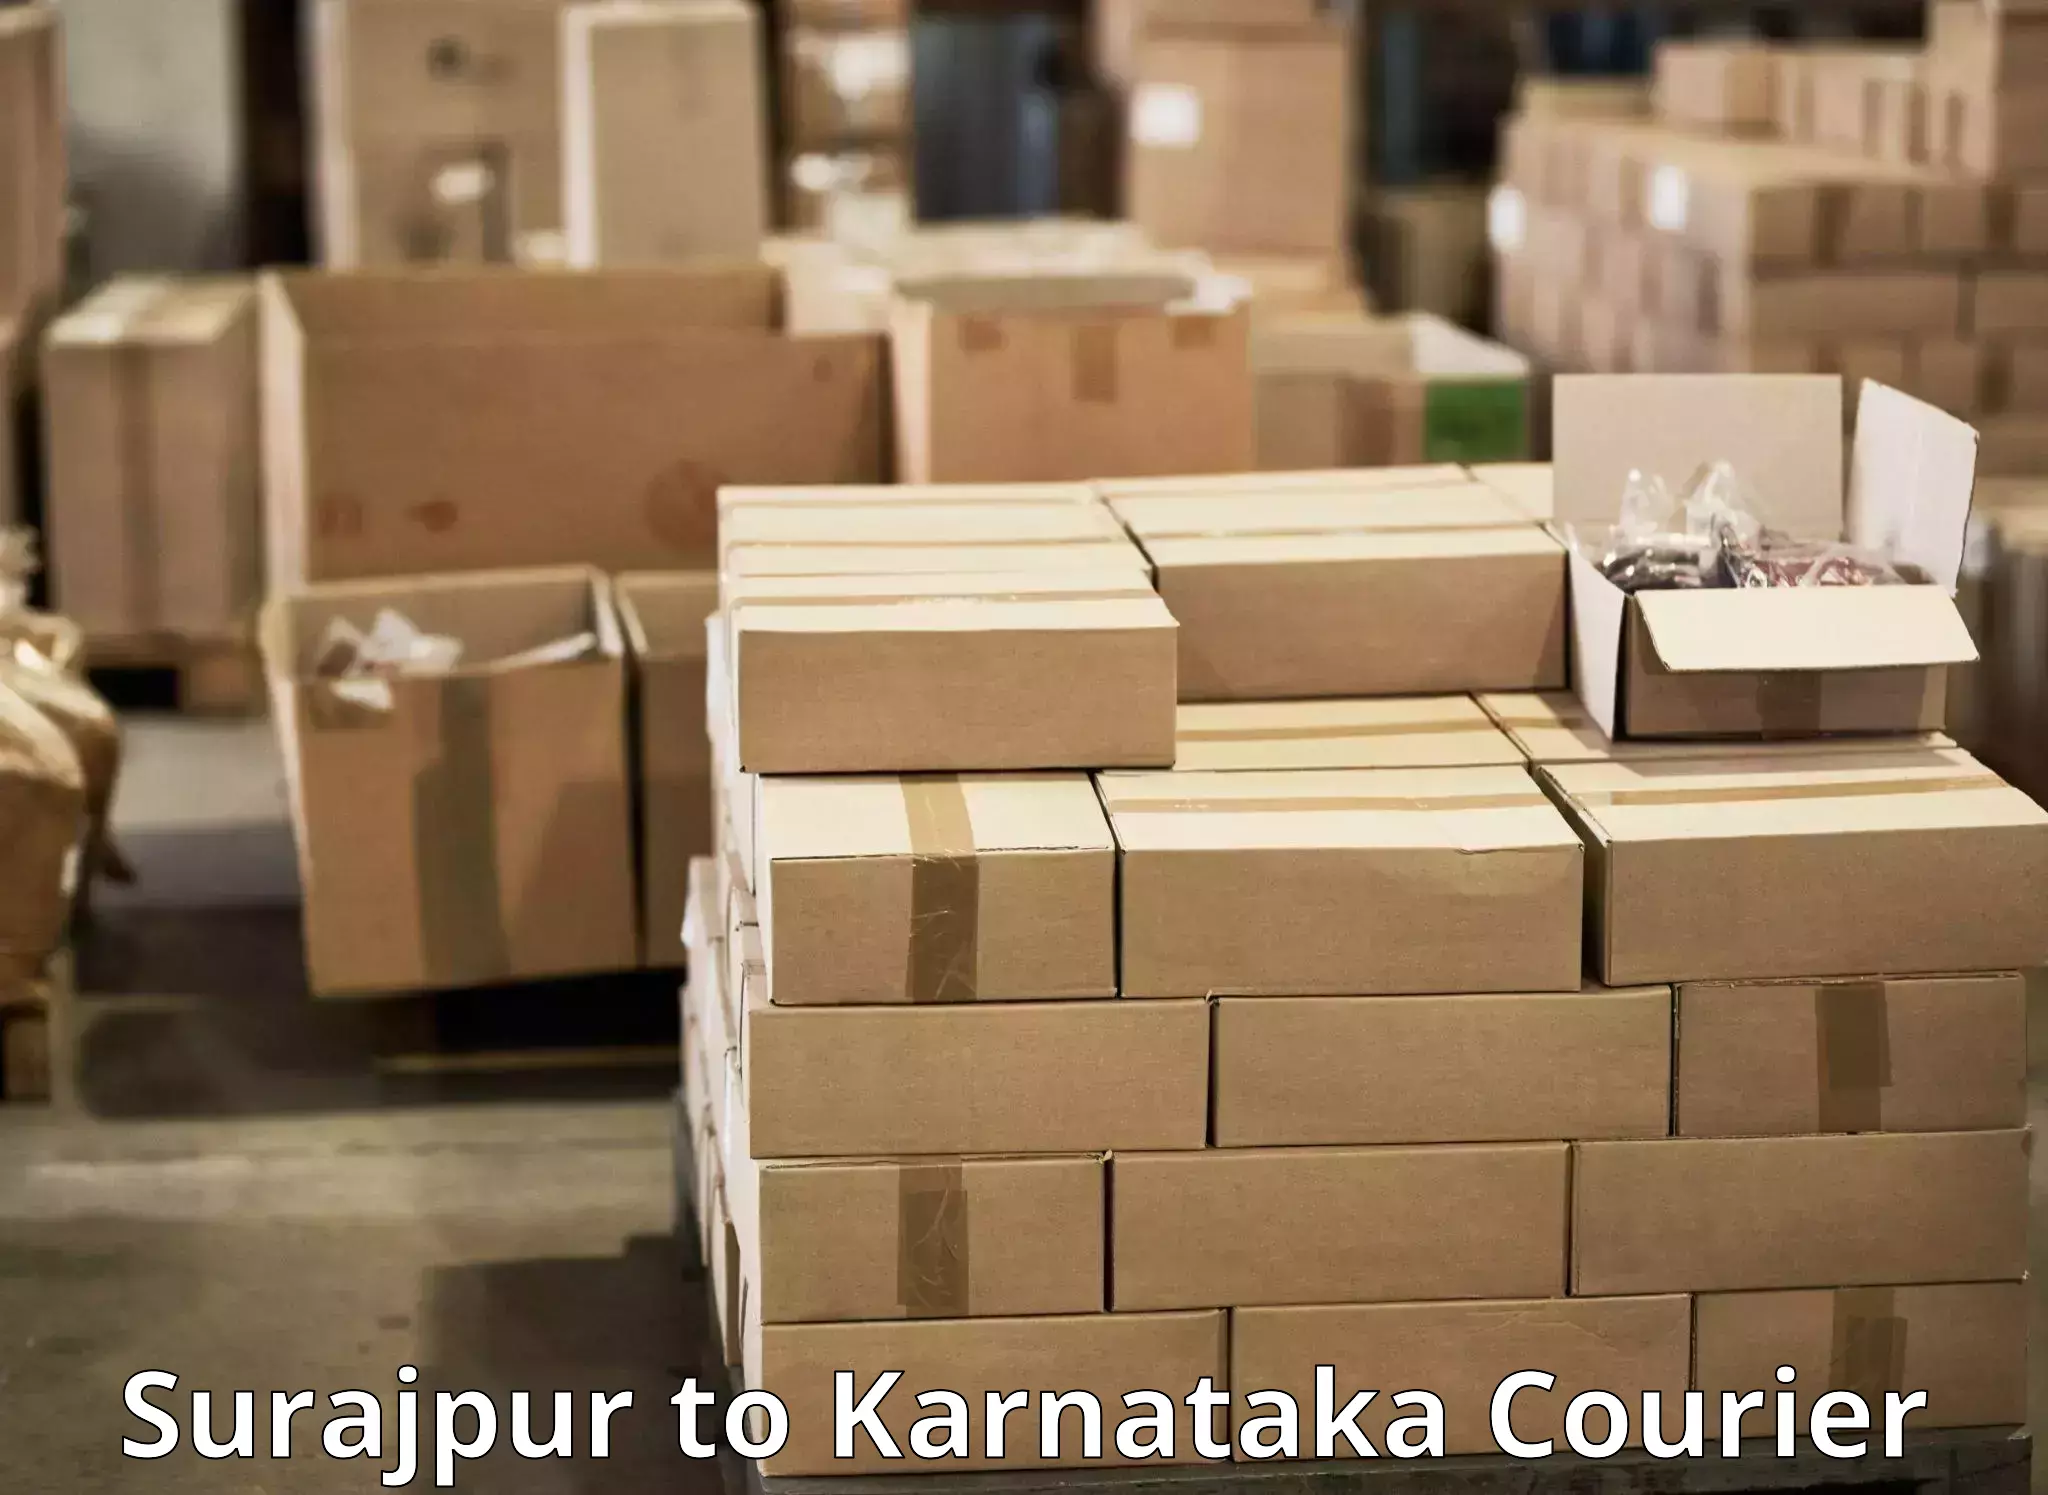 Same-day delivery solutions Surajpur to Laxmeshwar